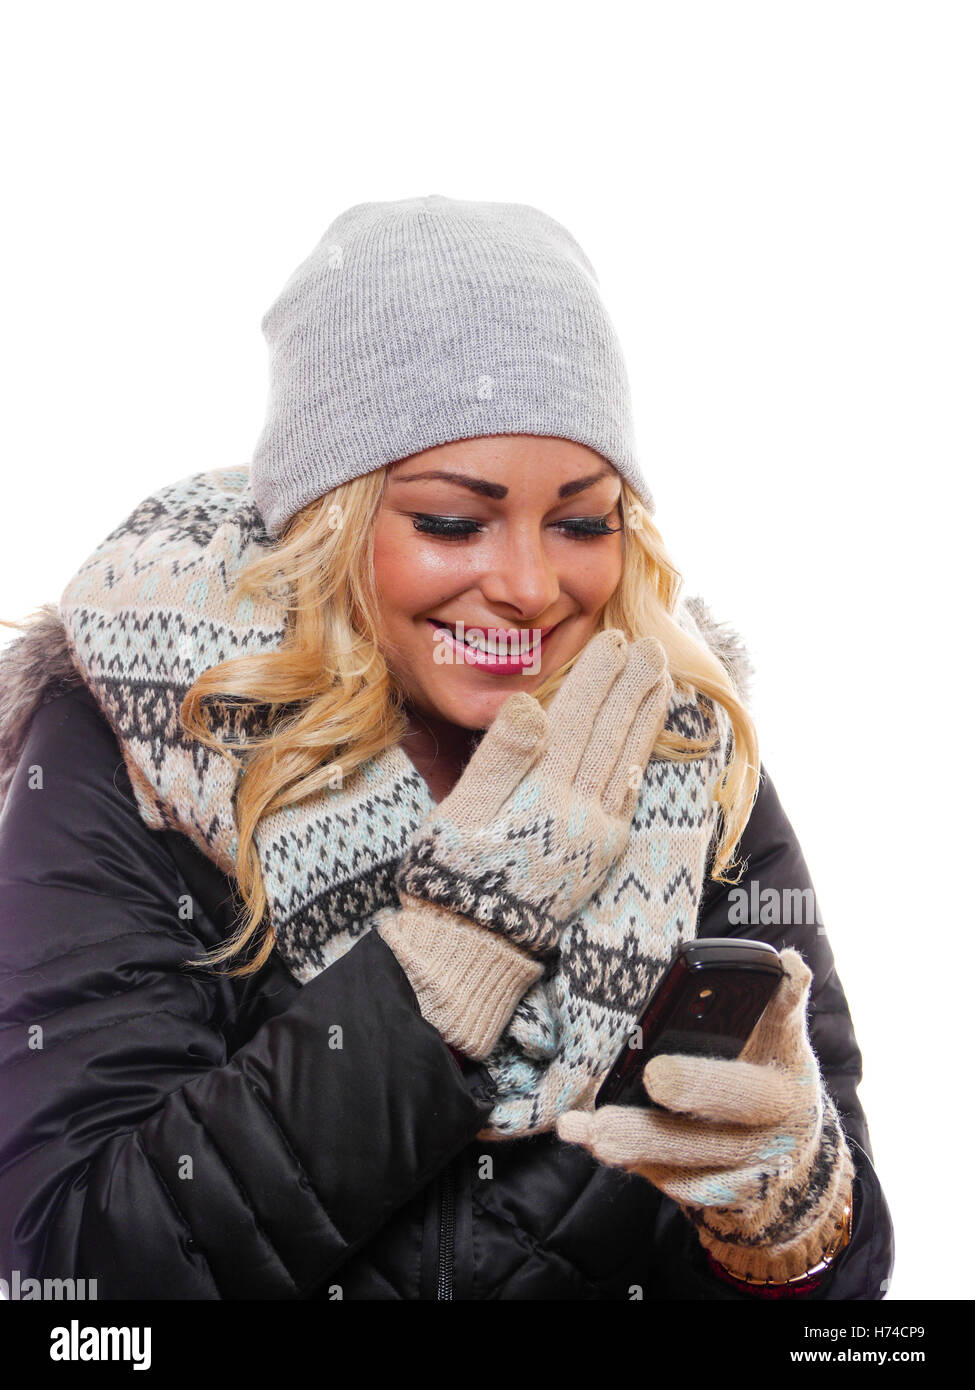 A attractive blond woman is laughing while looking at her cell phone. Stock Photo